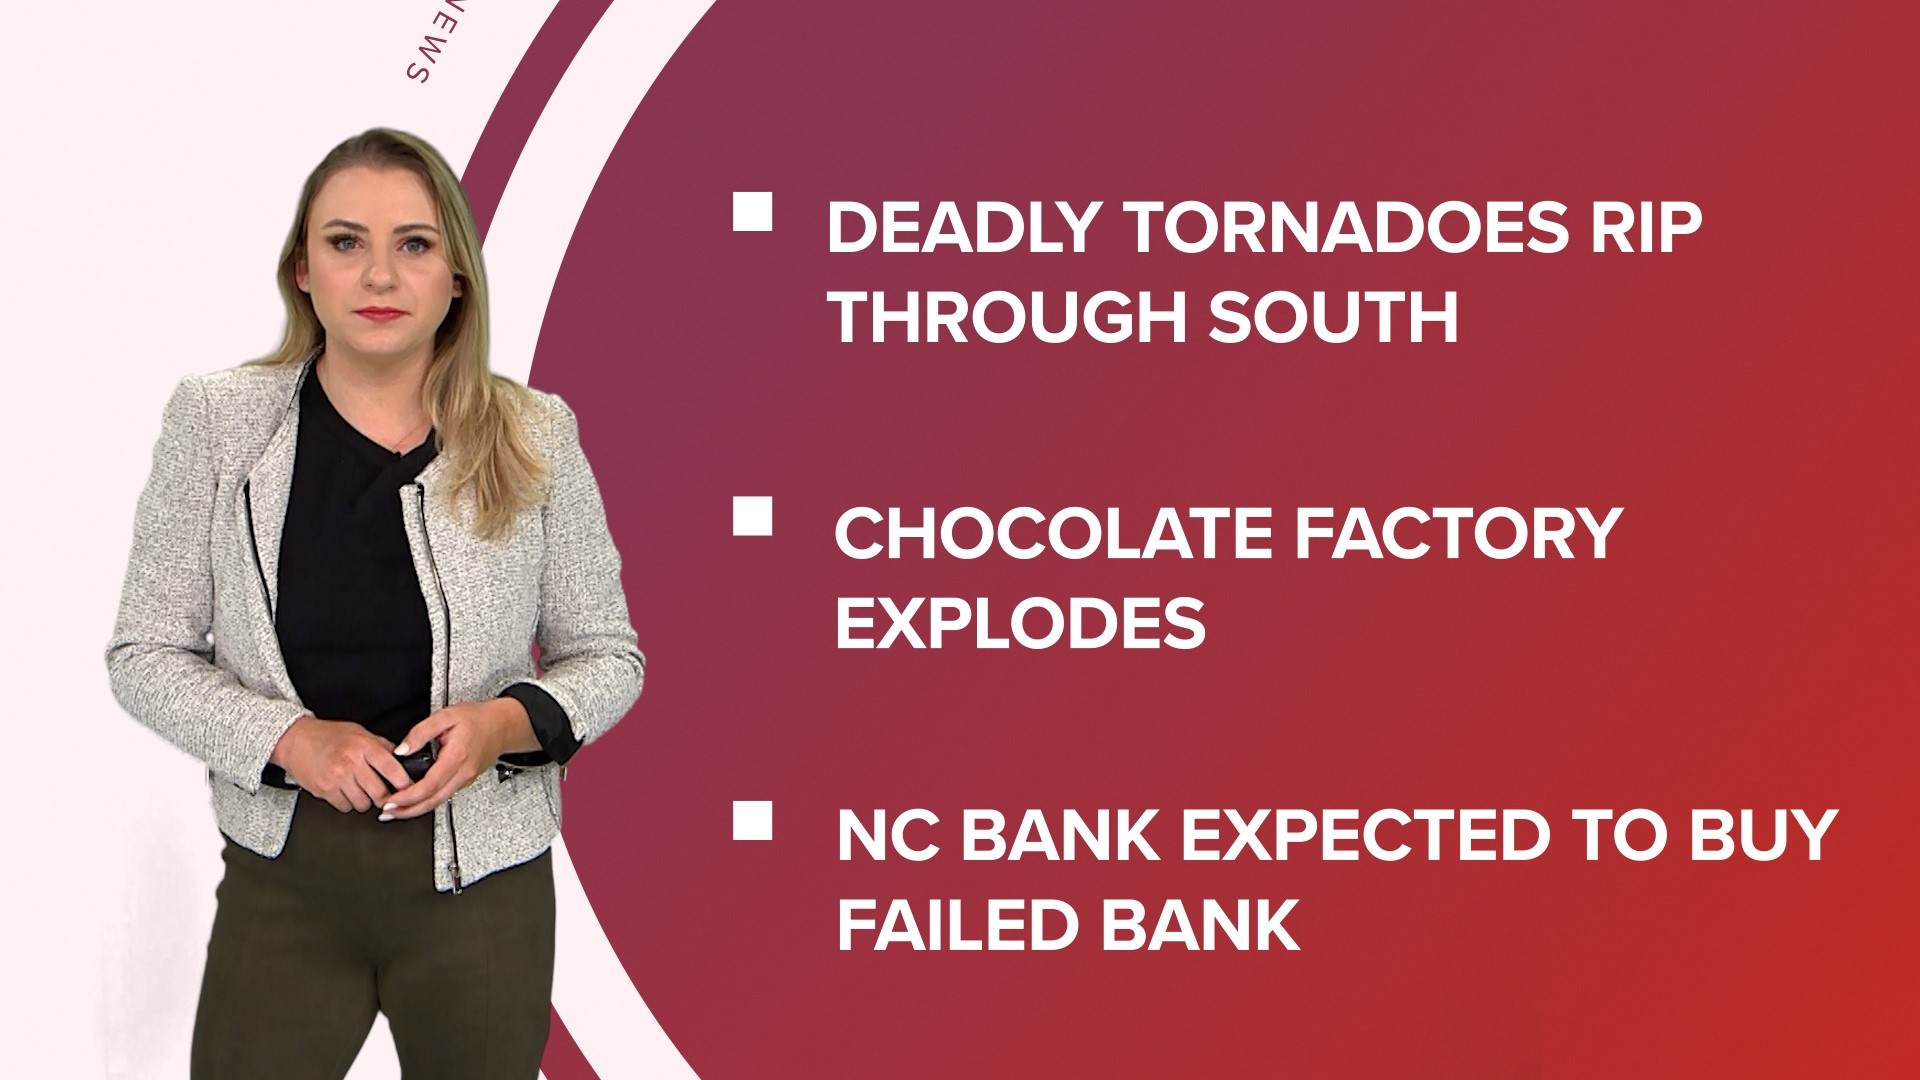 A look at what is happening in the news from deadly tornadoes in the South to capping insulin prices and a historic Final Four.